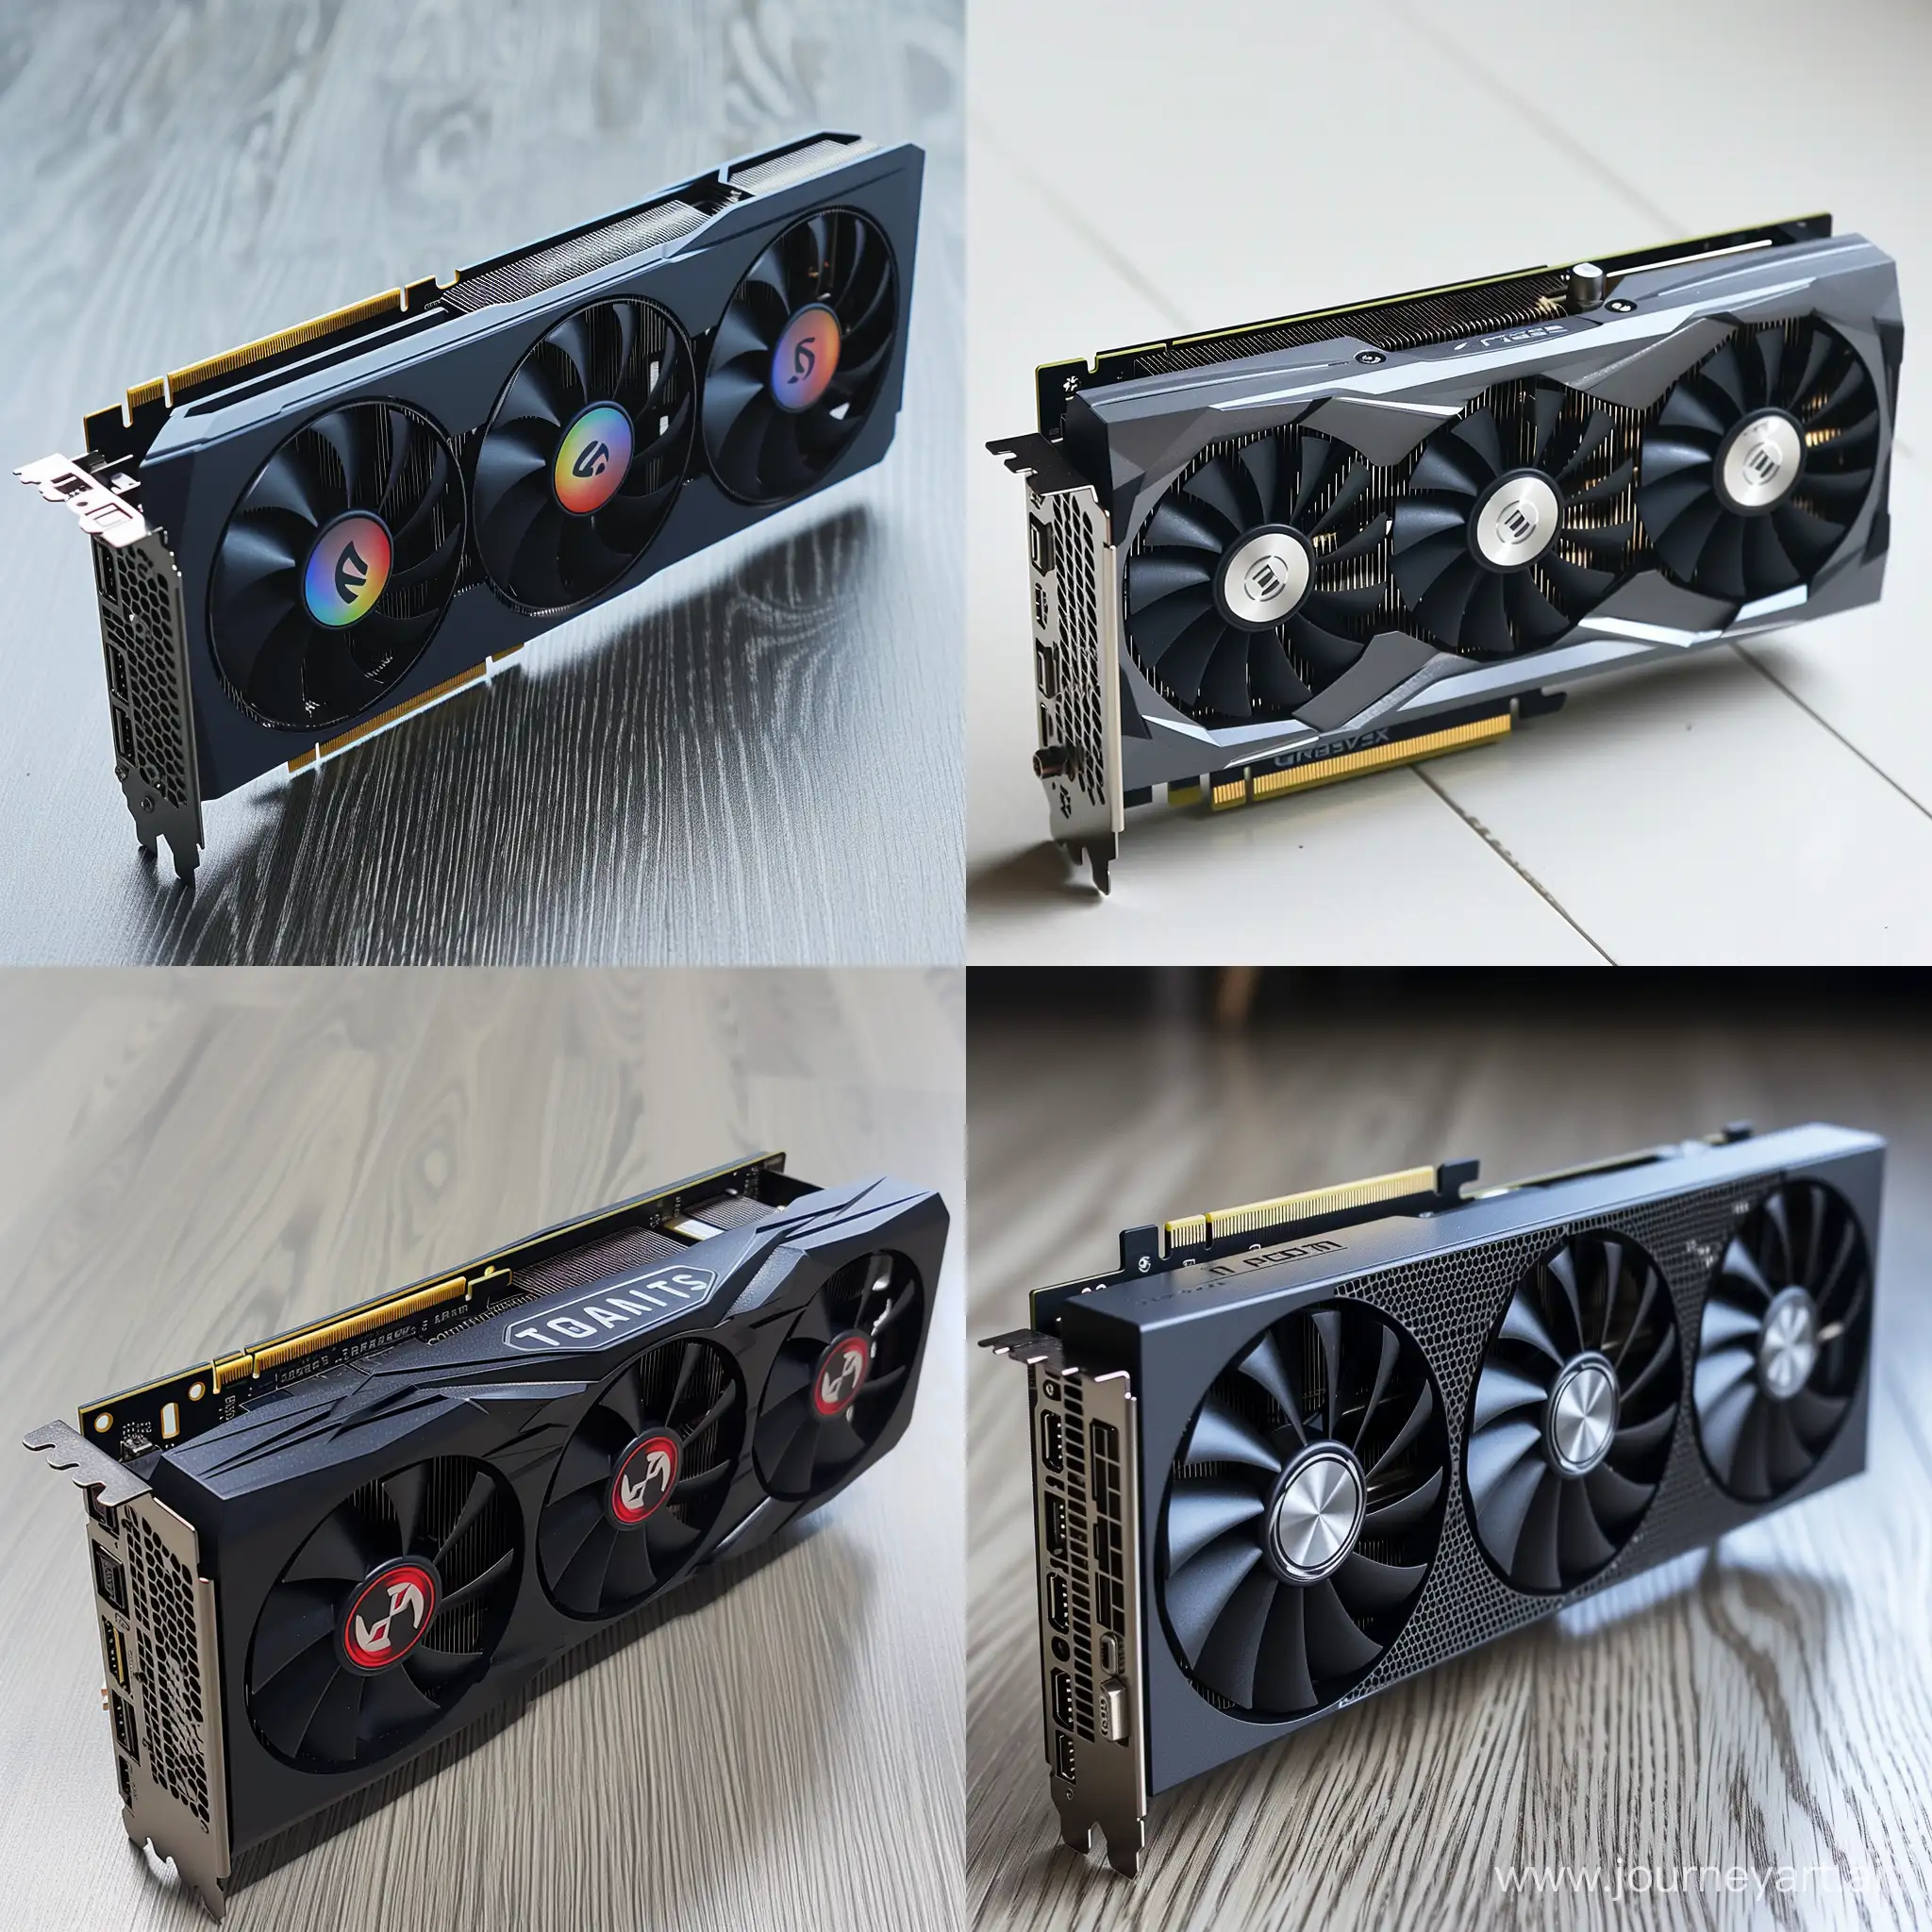 Draw a powerful turbo-cooled gaming graphics card